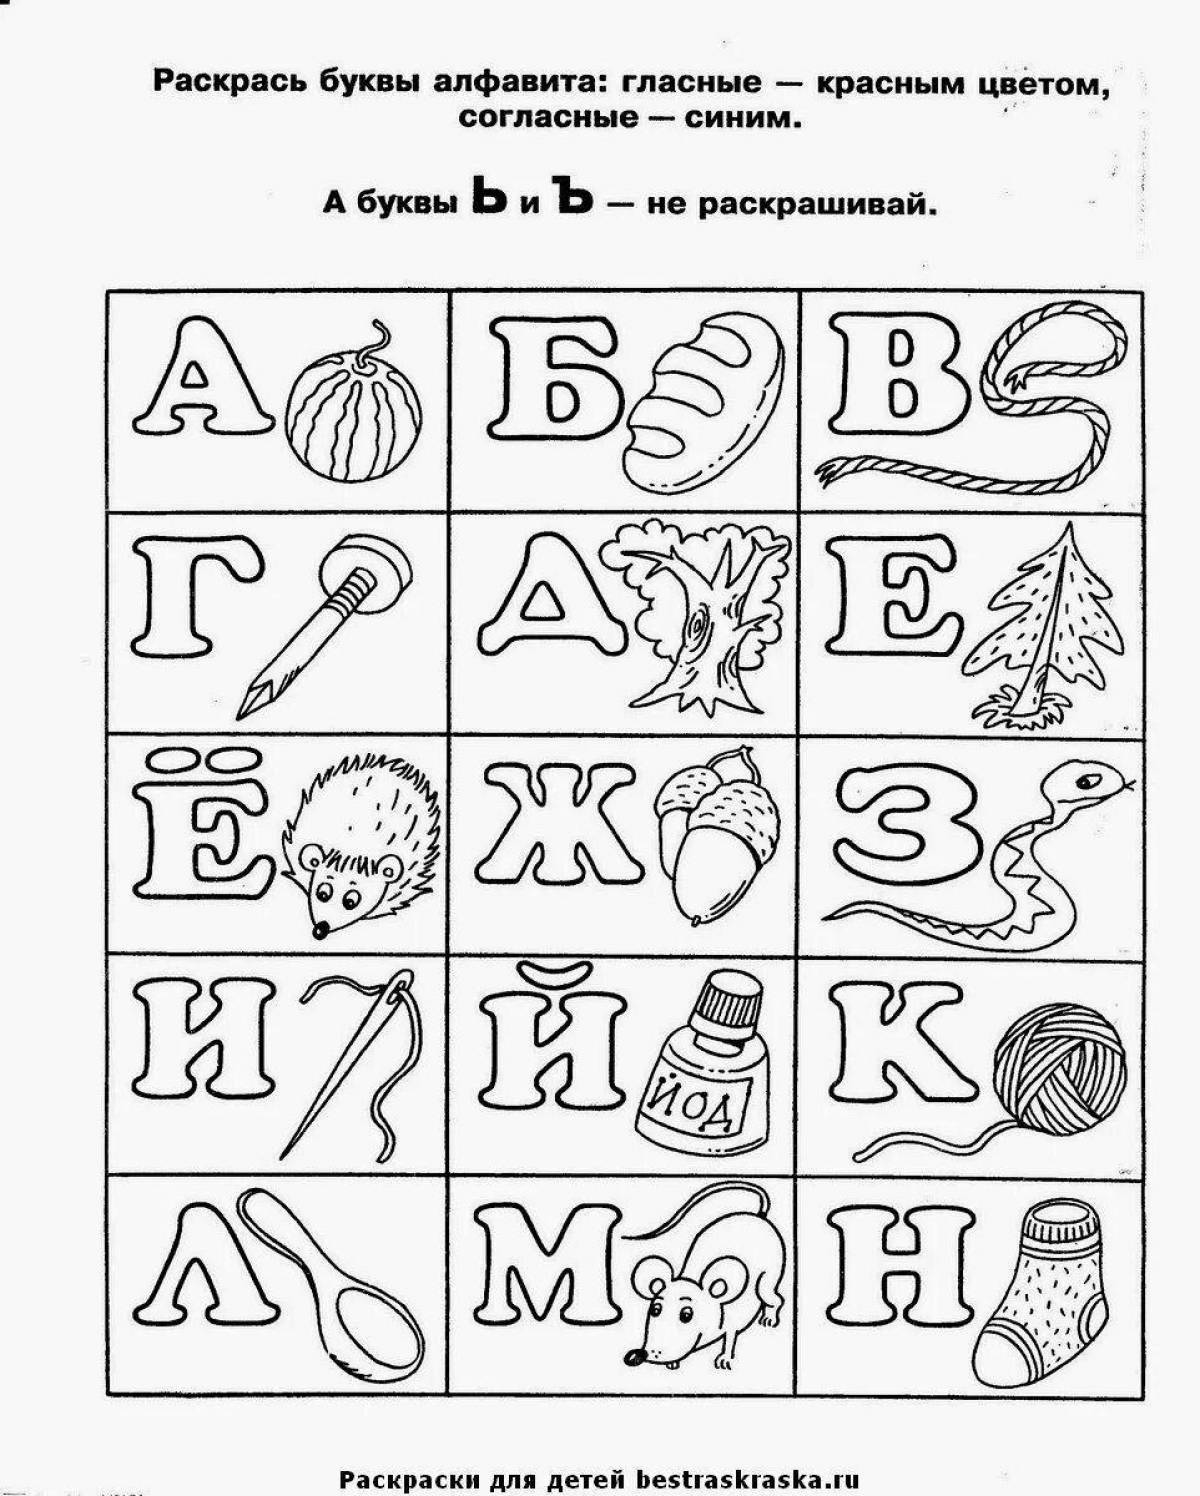 Russian letters for children #9